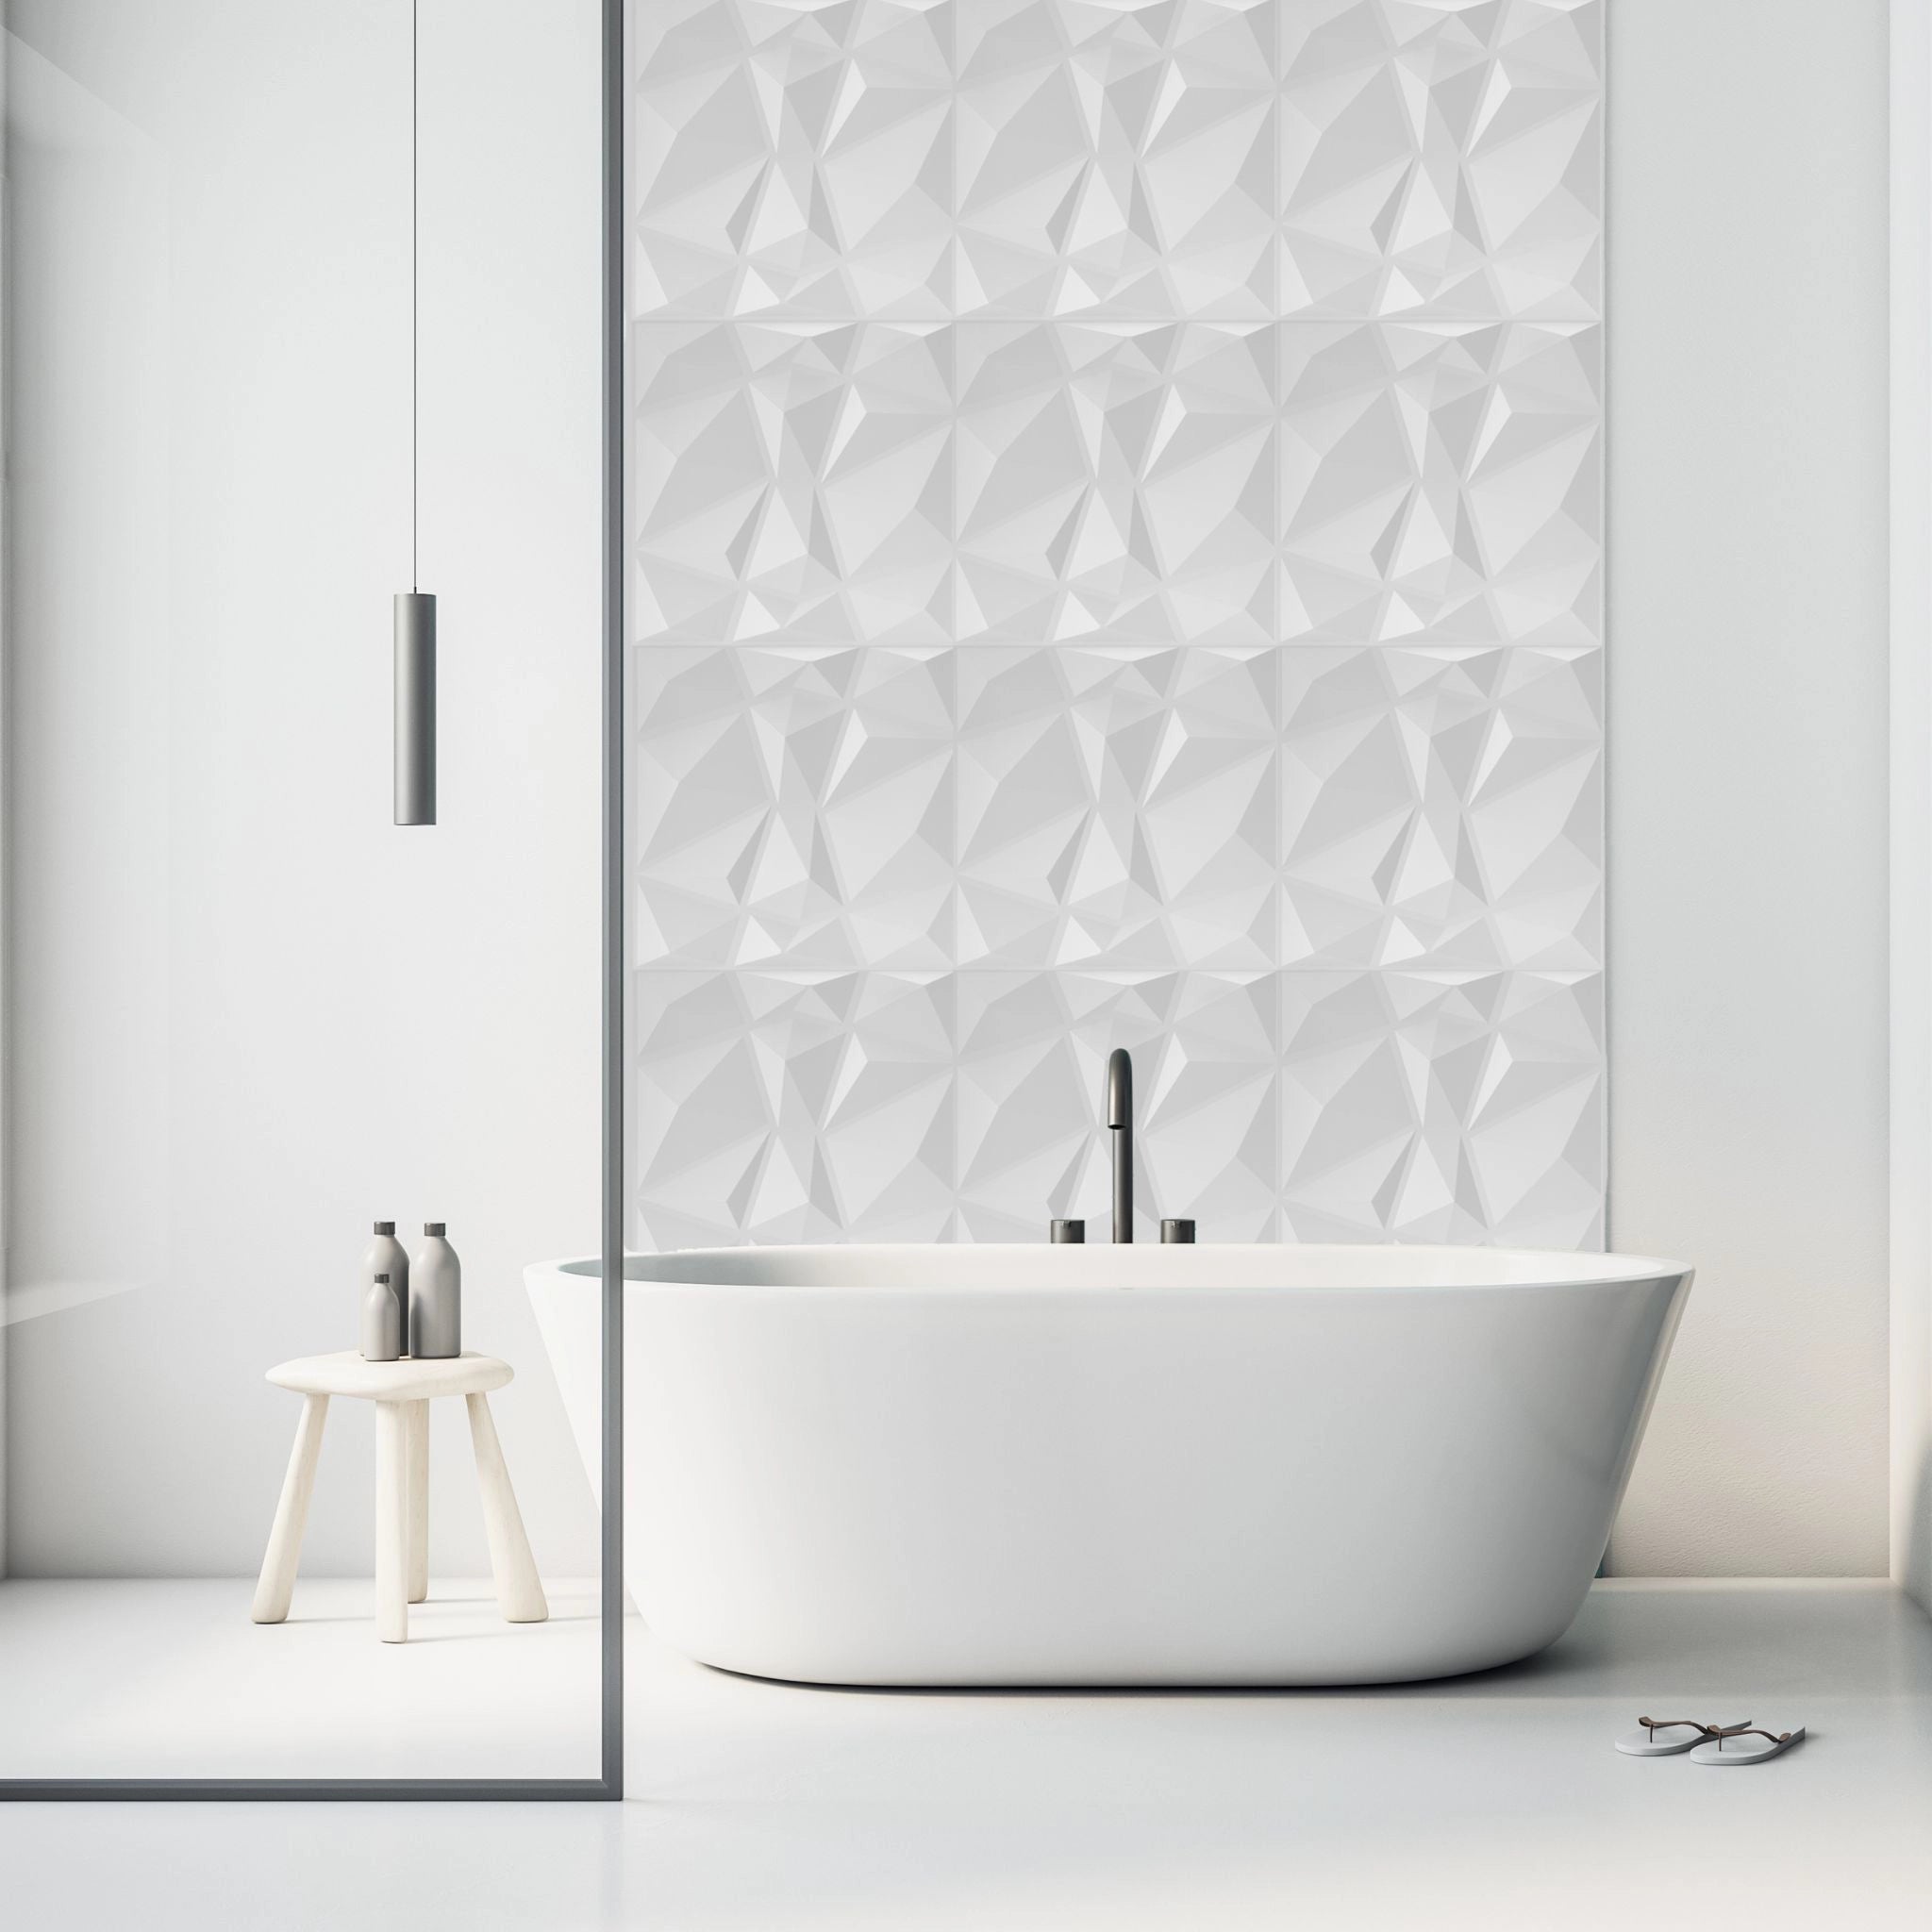 White PVC wall panel with geometric design in stylish Bath room